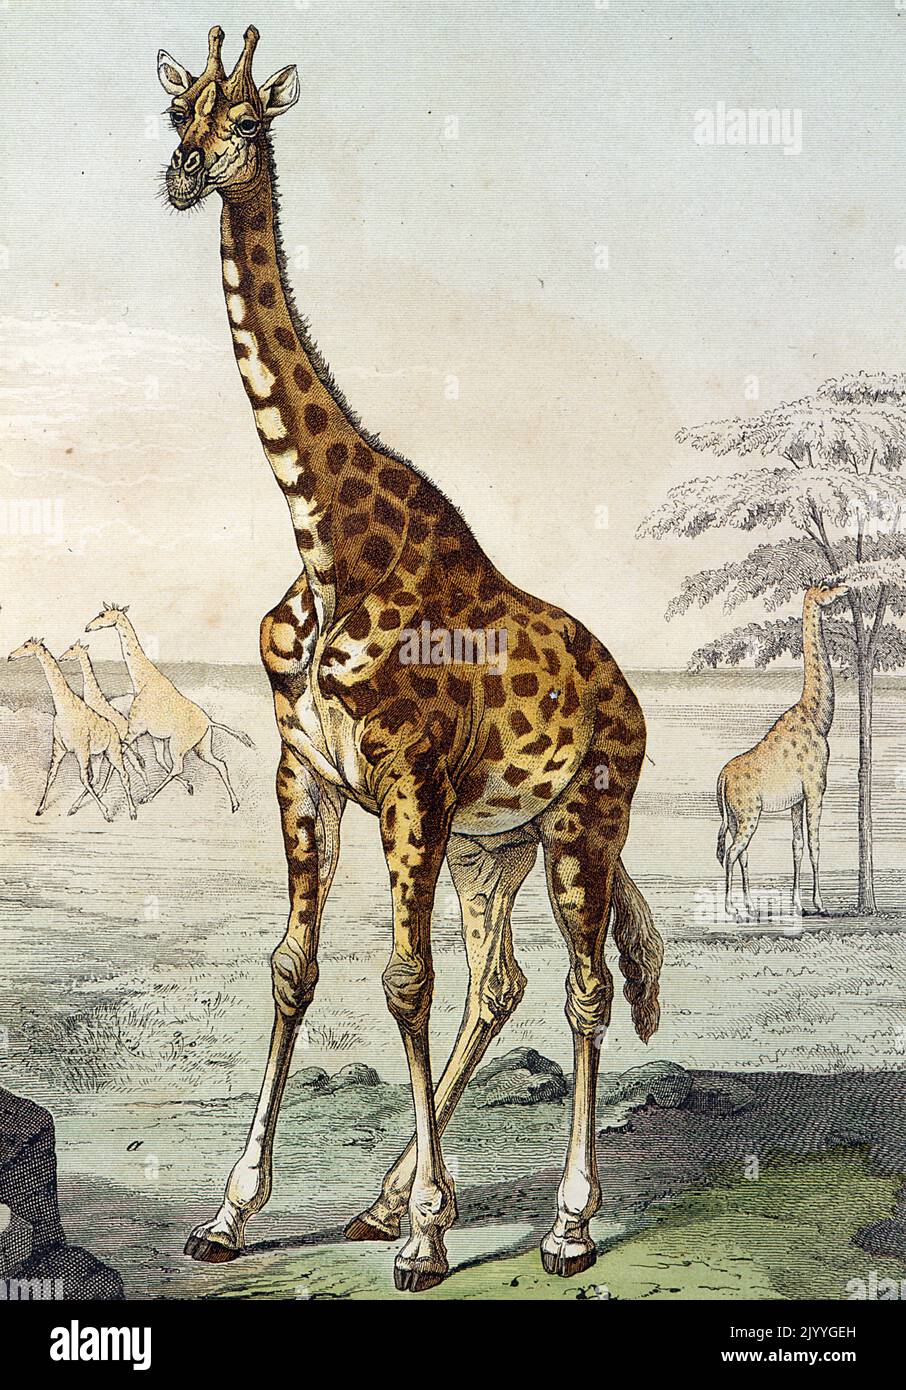 Coloured Illustration depicting a giraffe in their natural habitat. Stock Photo